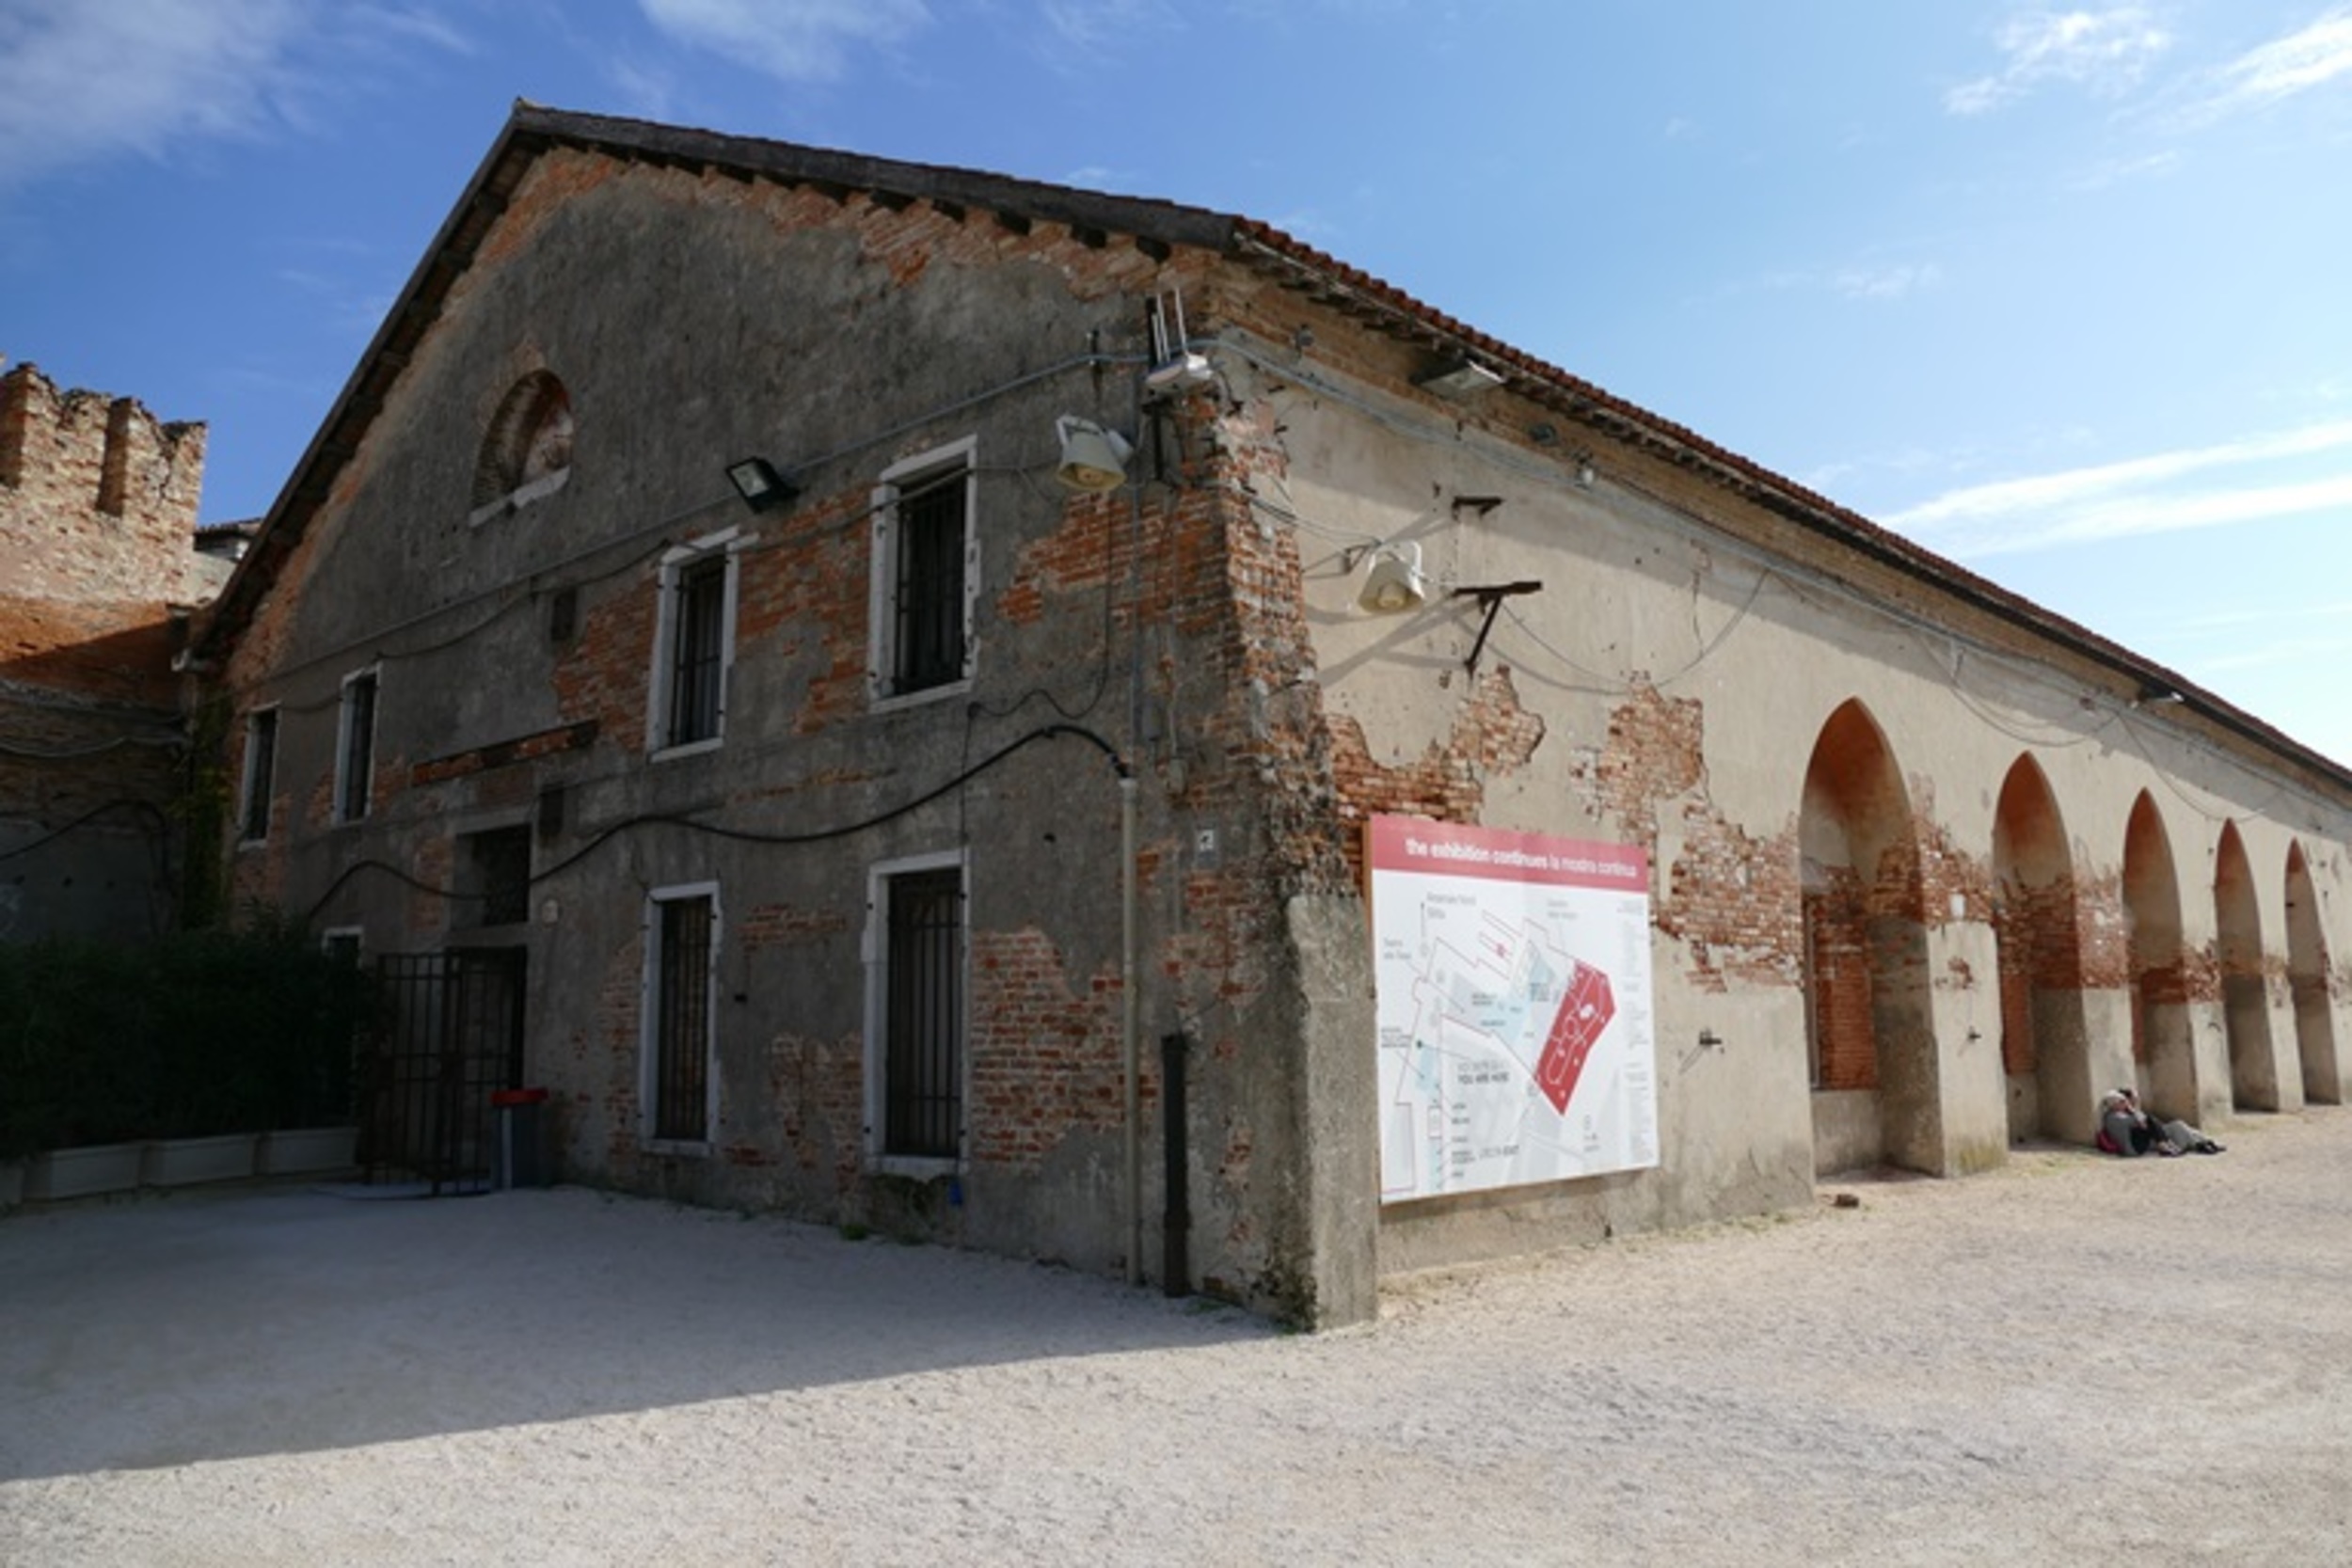 Outside view of Tesa dell'Isolotto. An old, long brick building, with craved archways cut into the right side of the building.